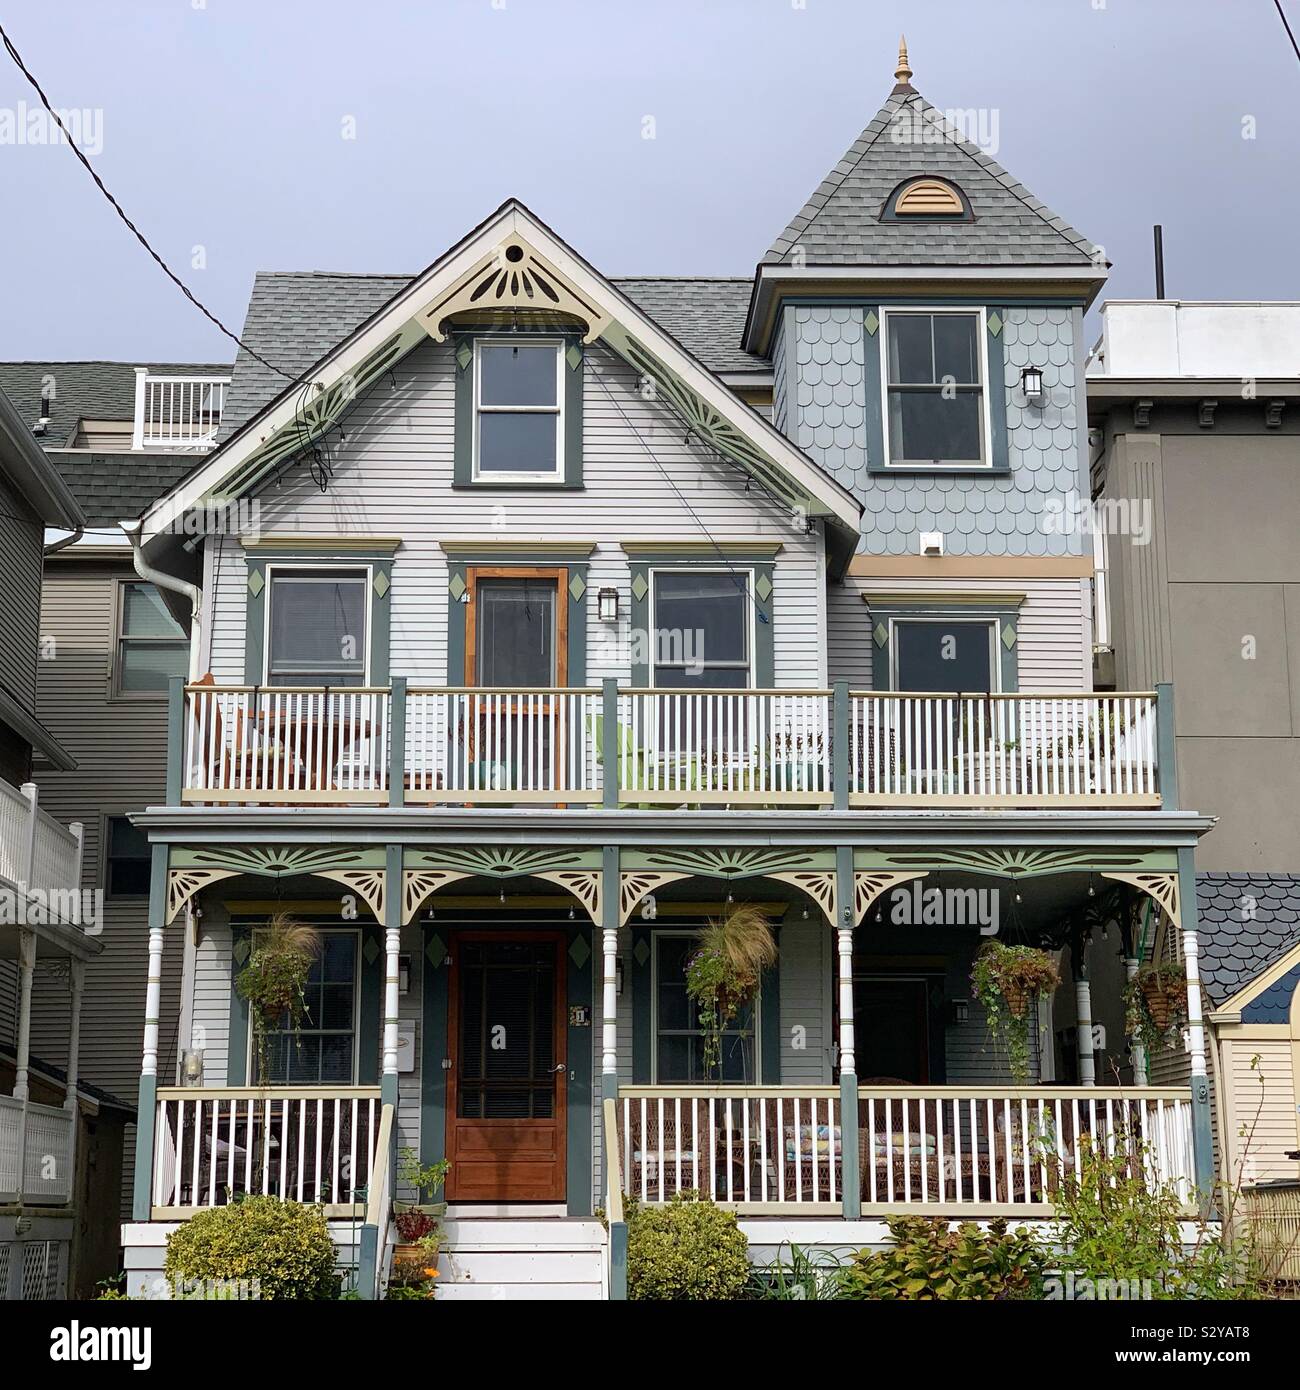 Ein Haus in Ocean Grove, Neptun Township, Monmouth County, New Jersey, United States Stockfoto